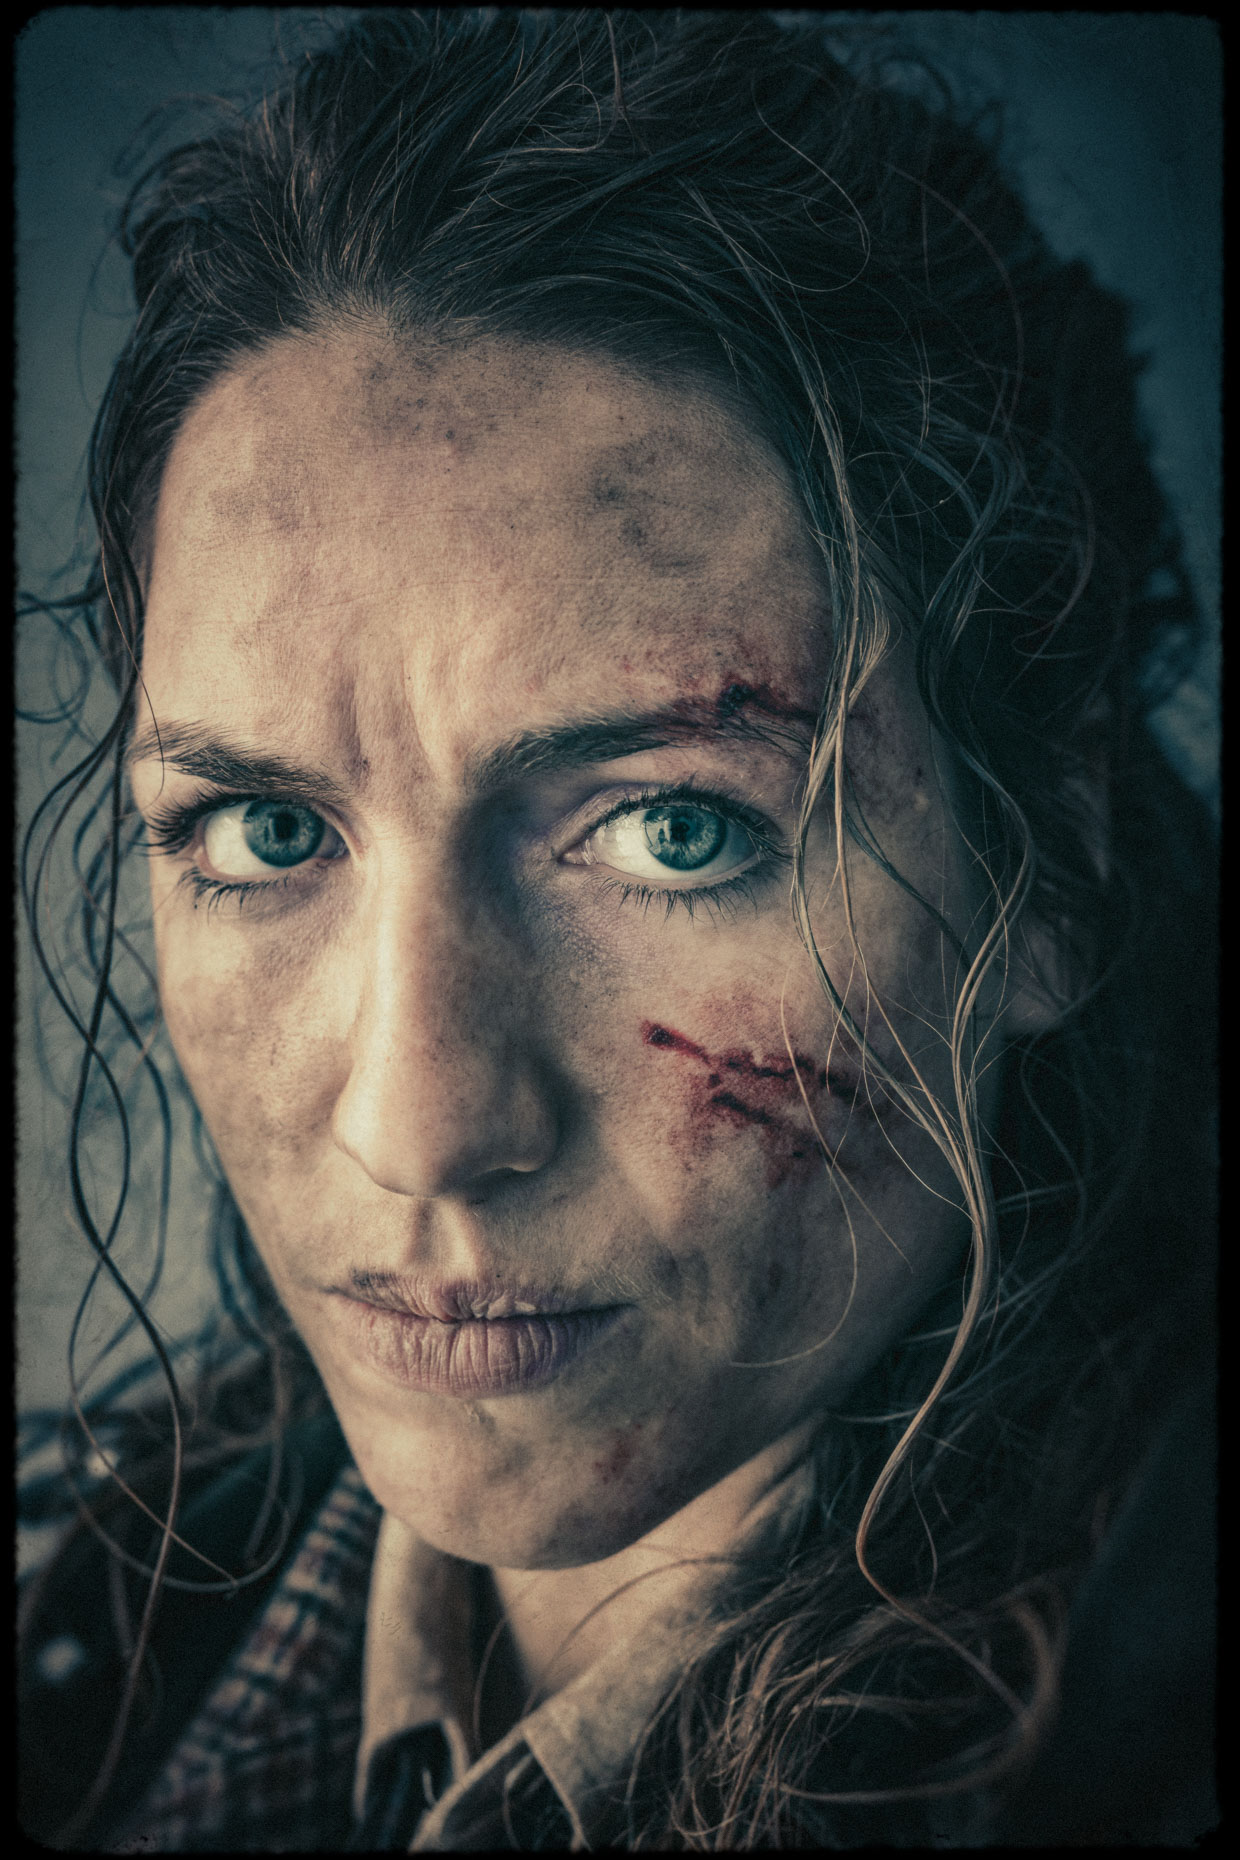 Character Portrait of actor Katie Michels as Ilona Mikos, one of 9 main characters. Introducing the apocalyptic world of the Bad Choices Project, a cinematic visual screenplay and personal project by Andy Batt.